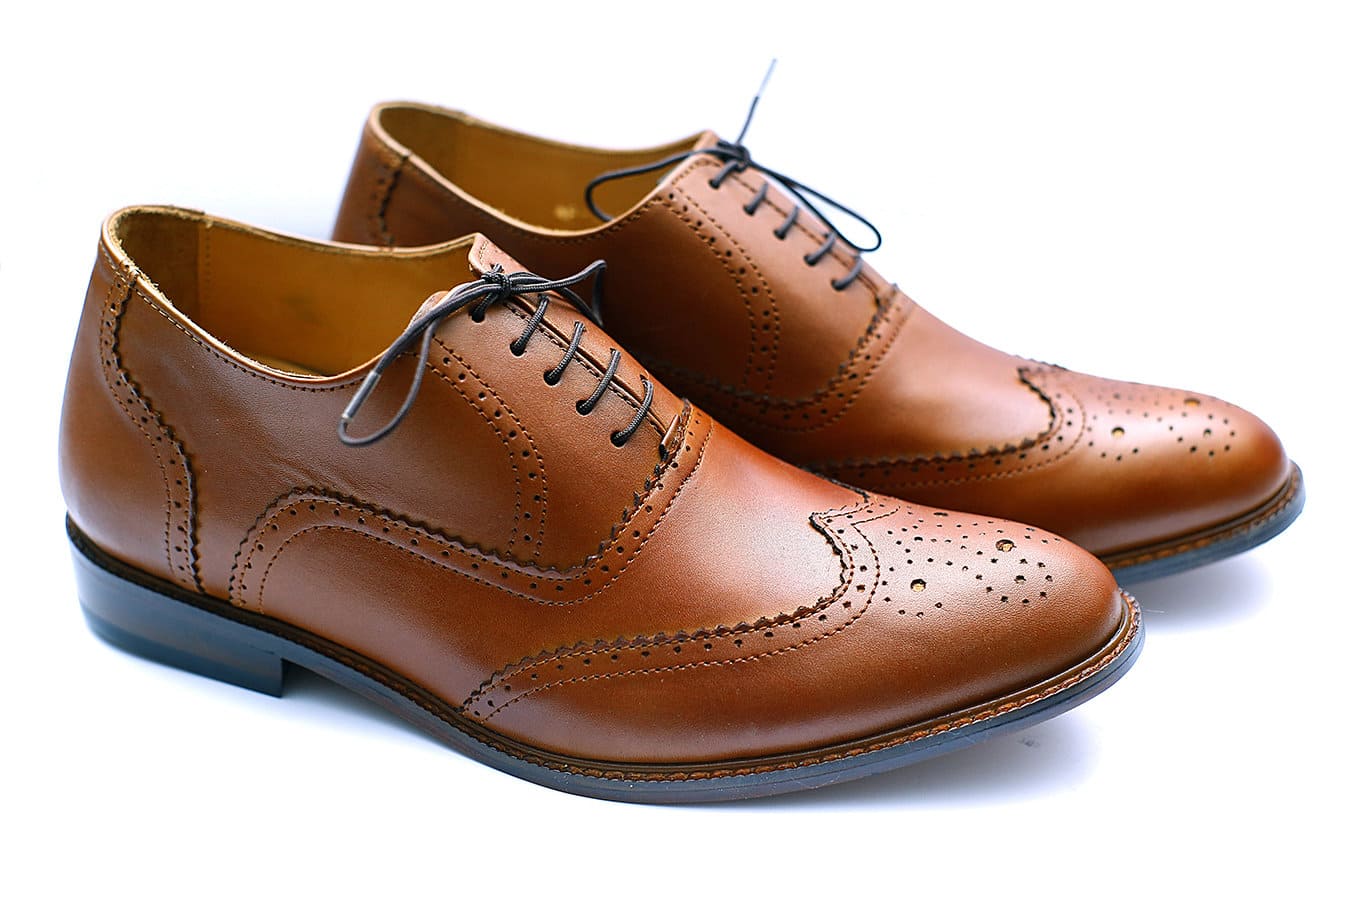 Elevator Shoes For Men – Boost Your Height And Confidence